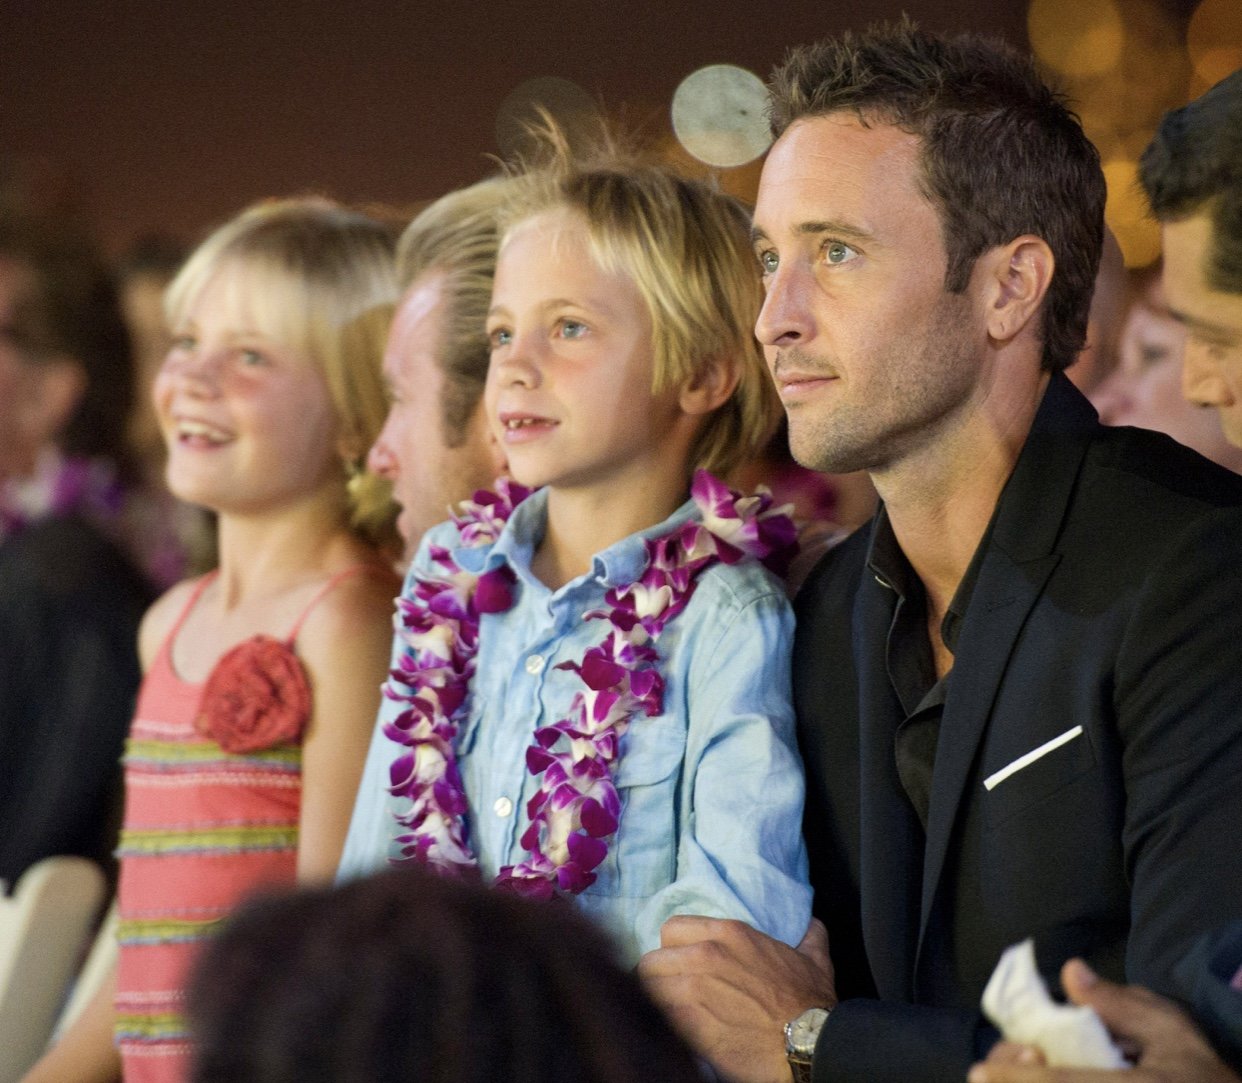 O’Loughlin at the screening of season 2 of “Hawaii Five-O” on September 10, 2011, | Source: Getty Images